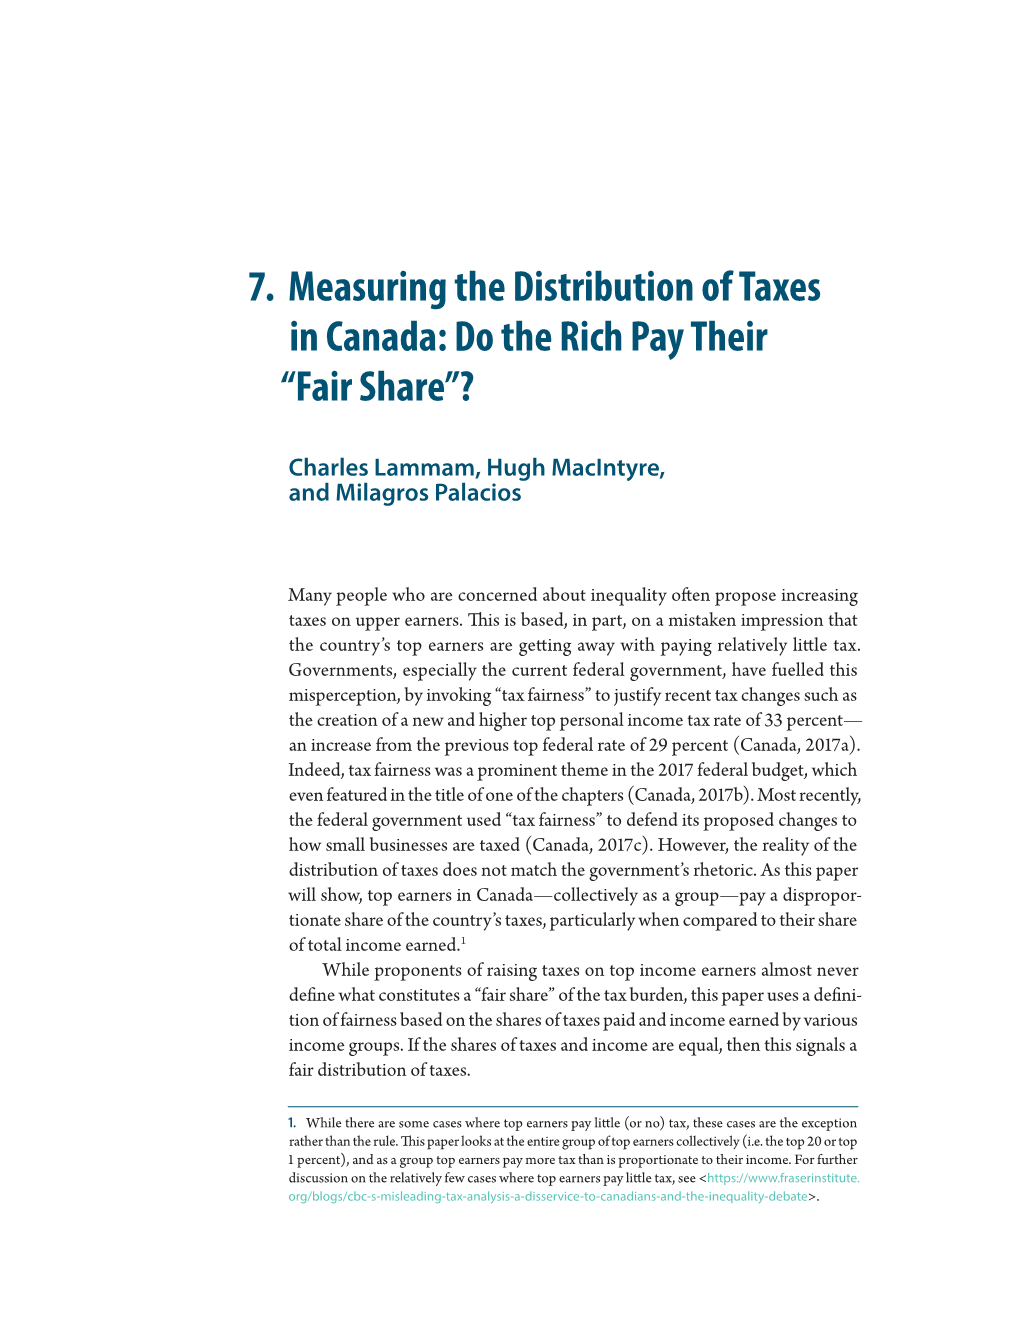 Measuring the Distribution of Taxes in Canada: Do the Rich Pay Their “Fair Share”?